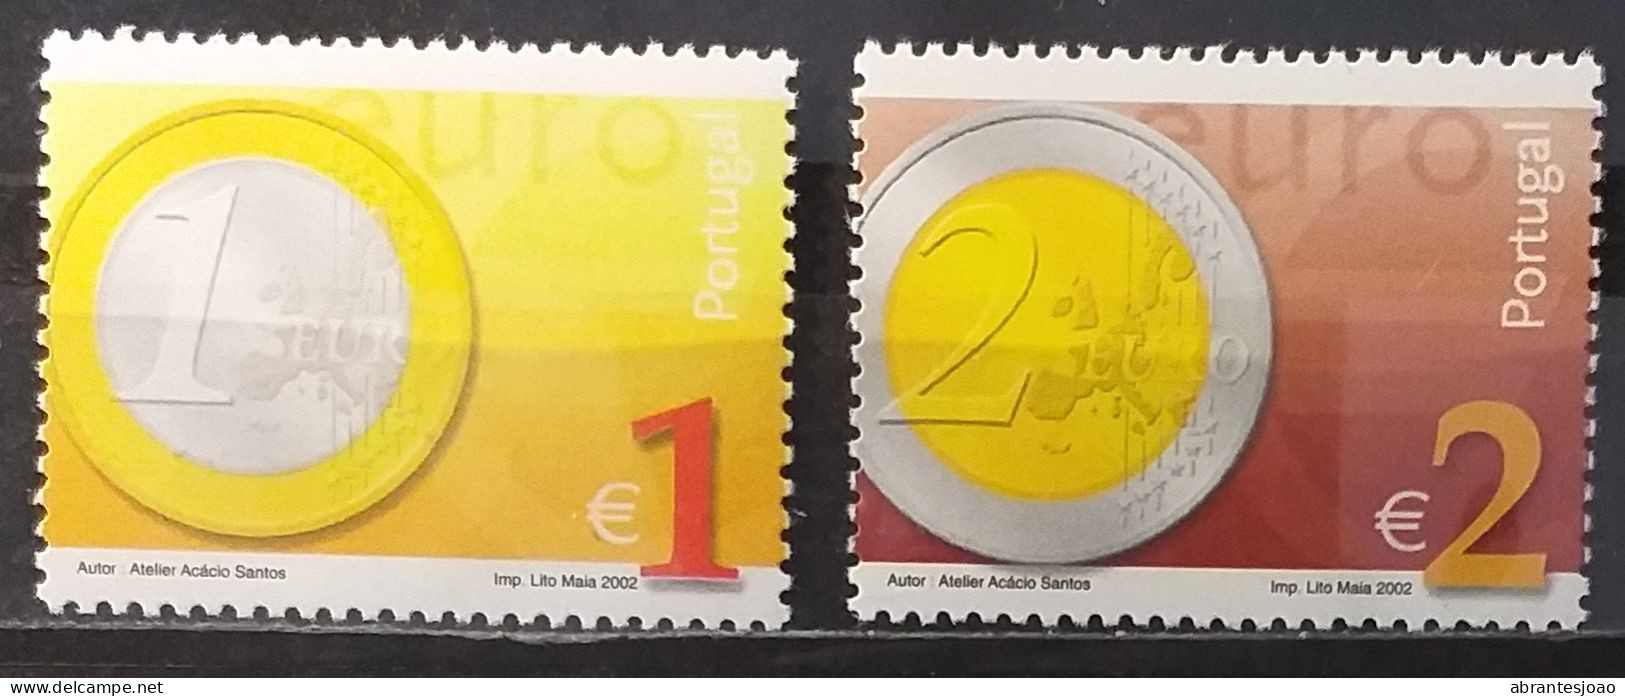 2002 - Portugal - MNH - Euro (€), The New Currency - 8 Stamps - Ungebraucht